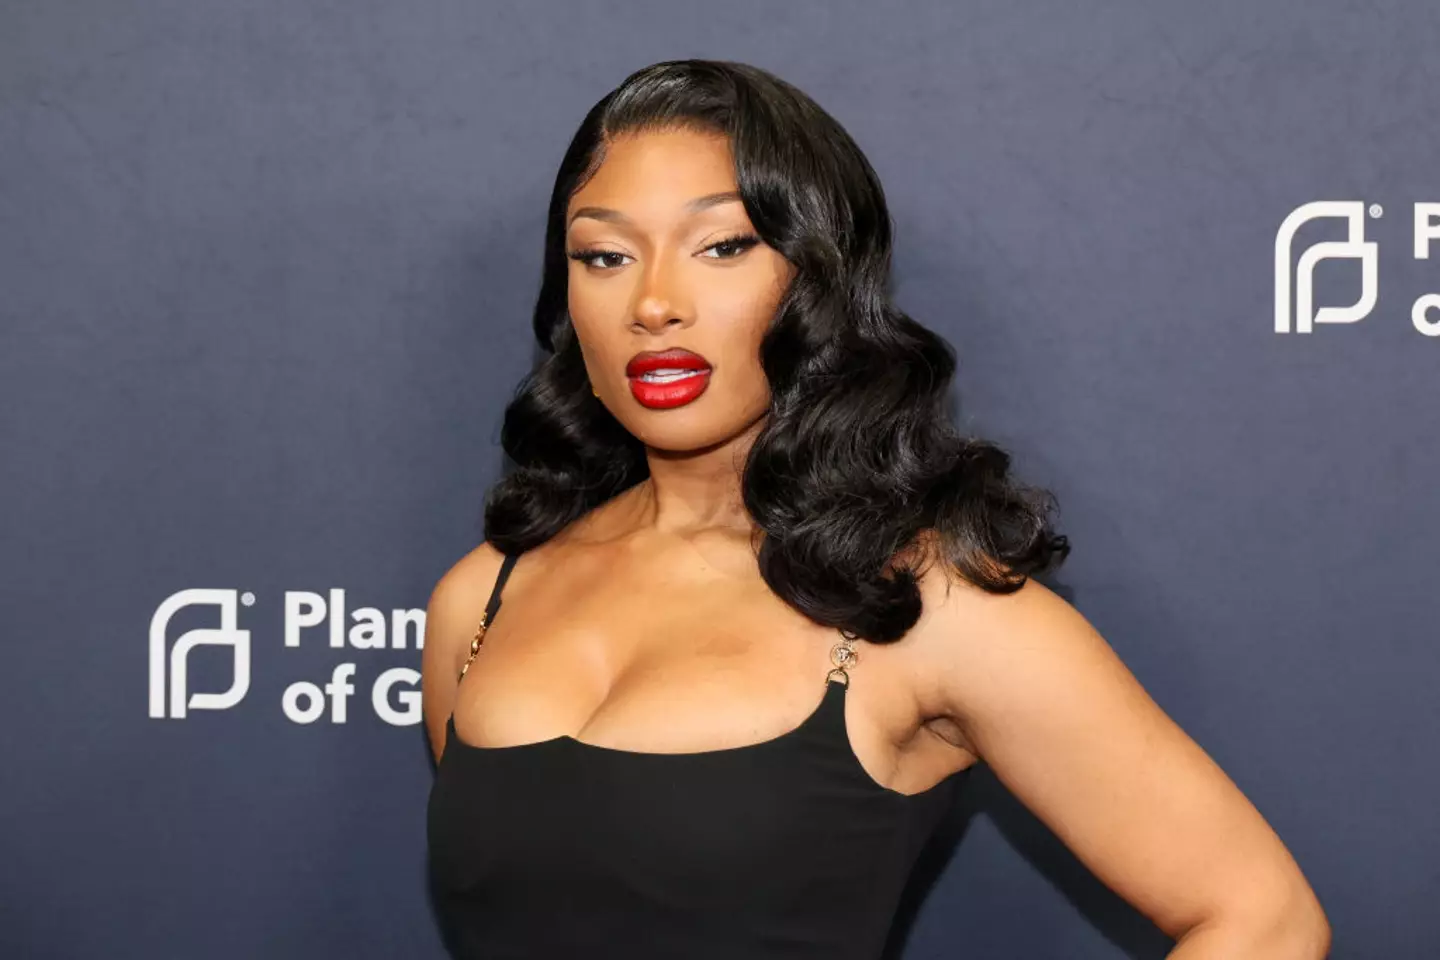 Megan Thee Stallion's lawyer has issued a response on the 'salacious accusations' made by her former cameraman, Emilio Garcia. (Dia Dipasupil / Staff / Getty Images)